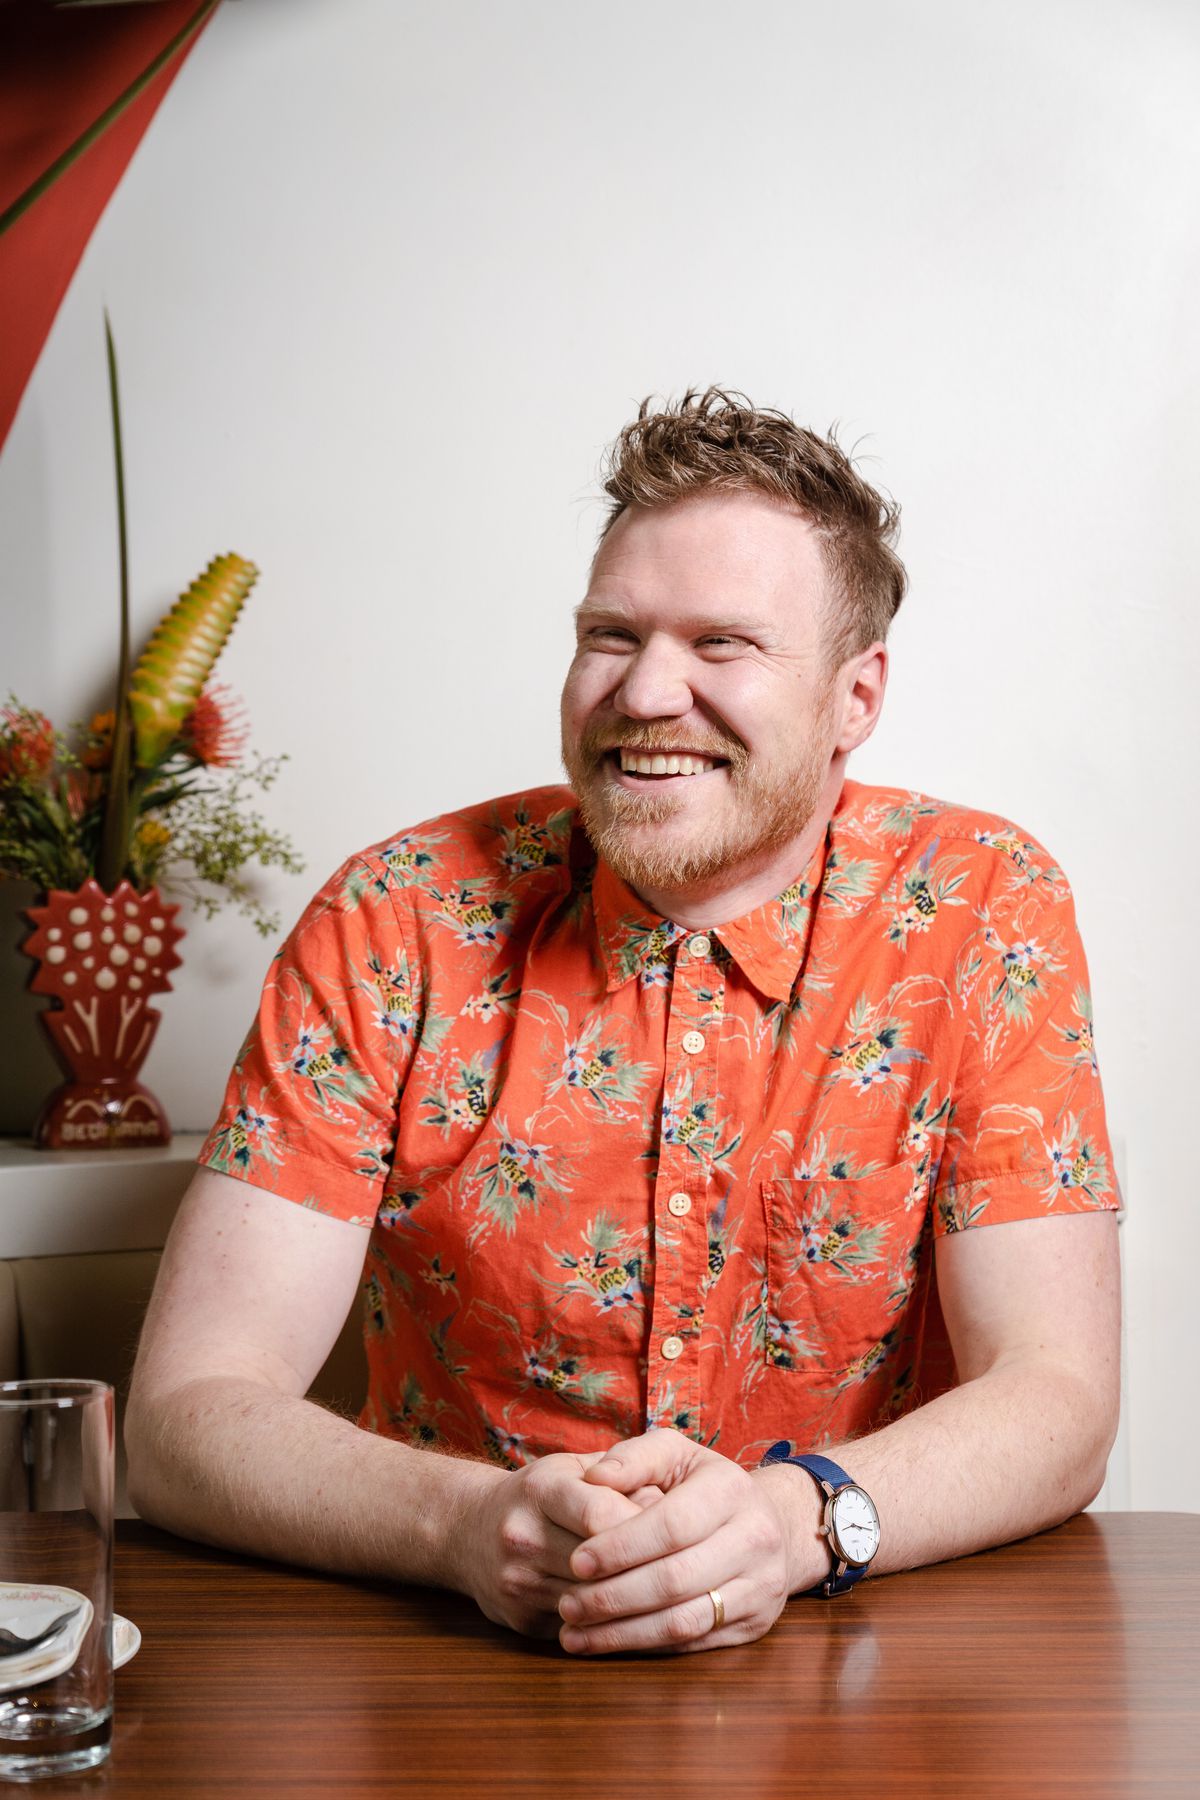 A man sits, laughing, at a table with his hands folded, wearing a blue watch and a bright orange button up with short sleeves. He’s smiling, with a short strawberry blonde beard